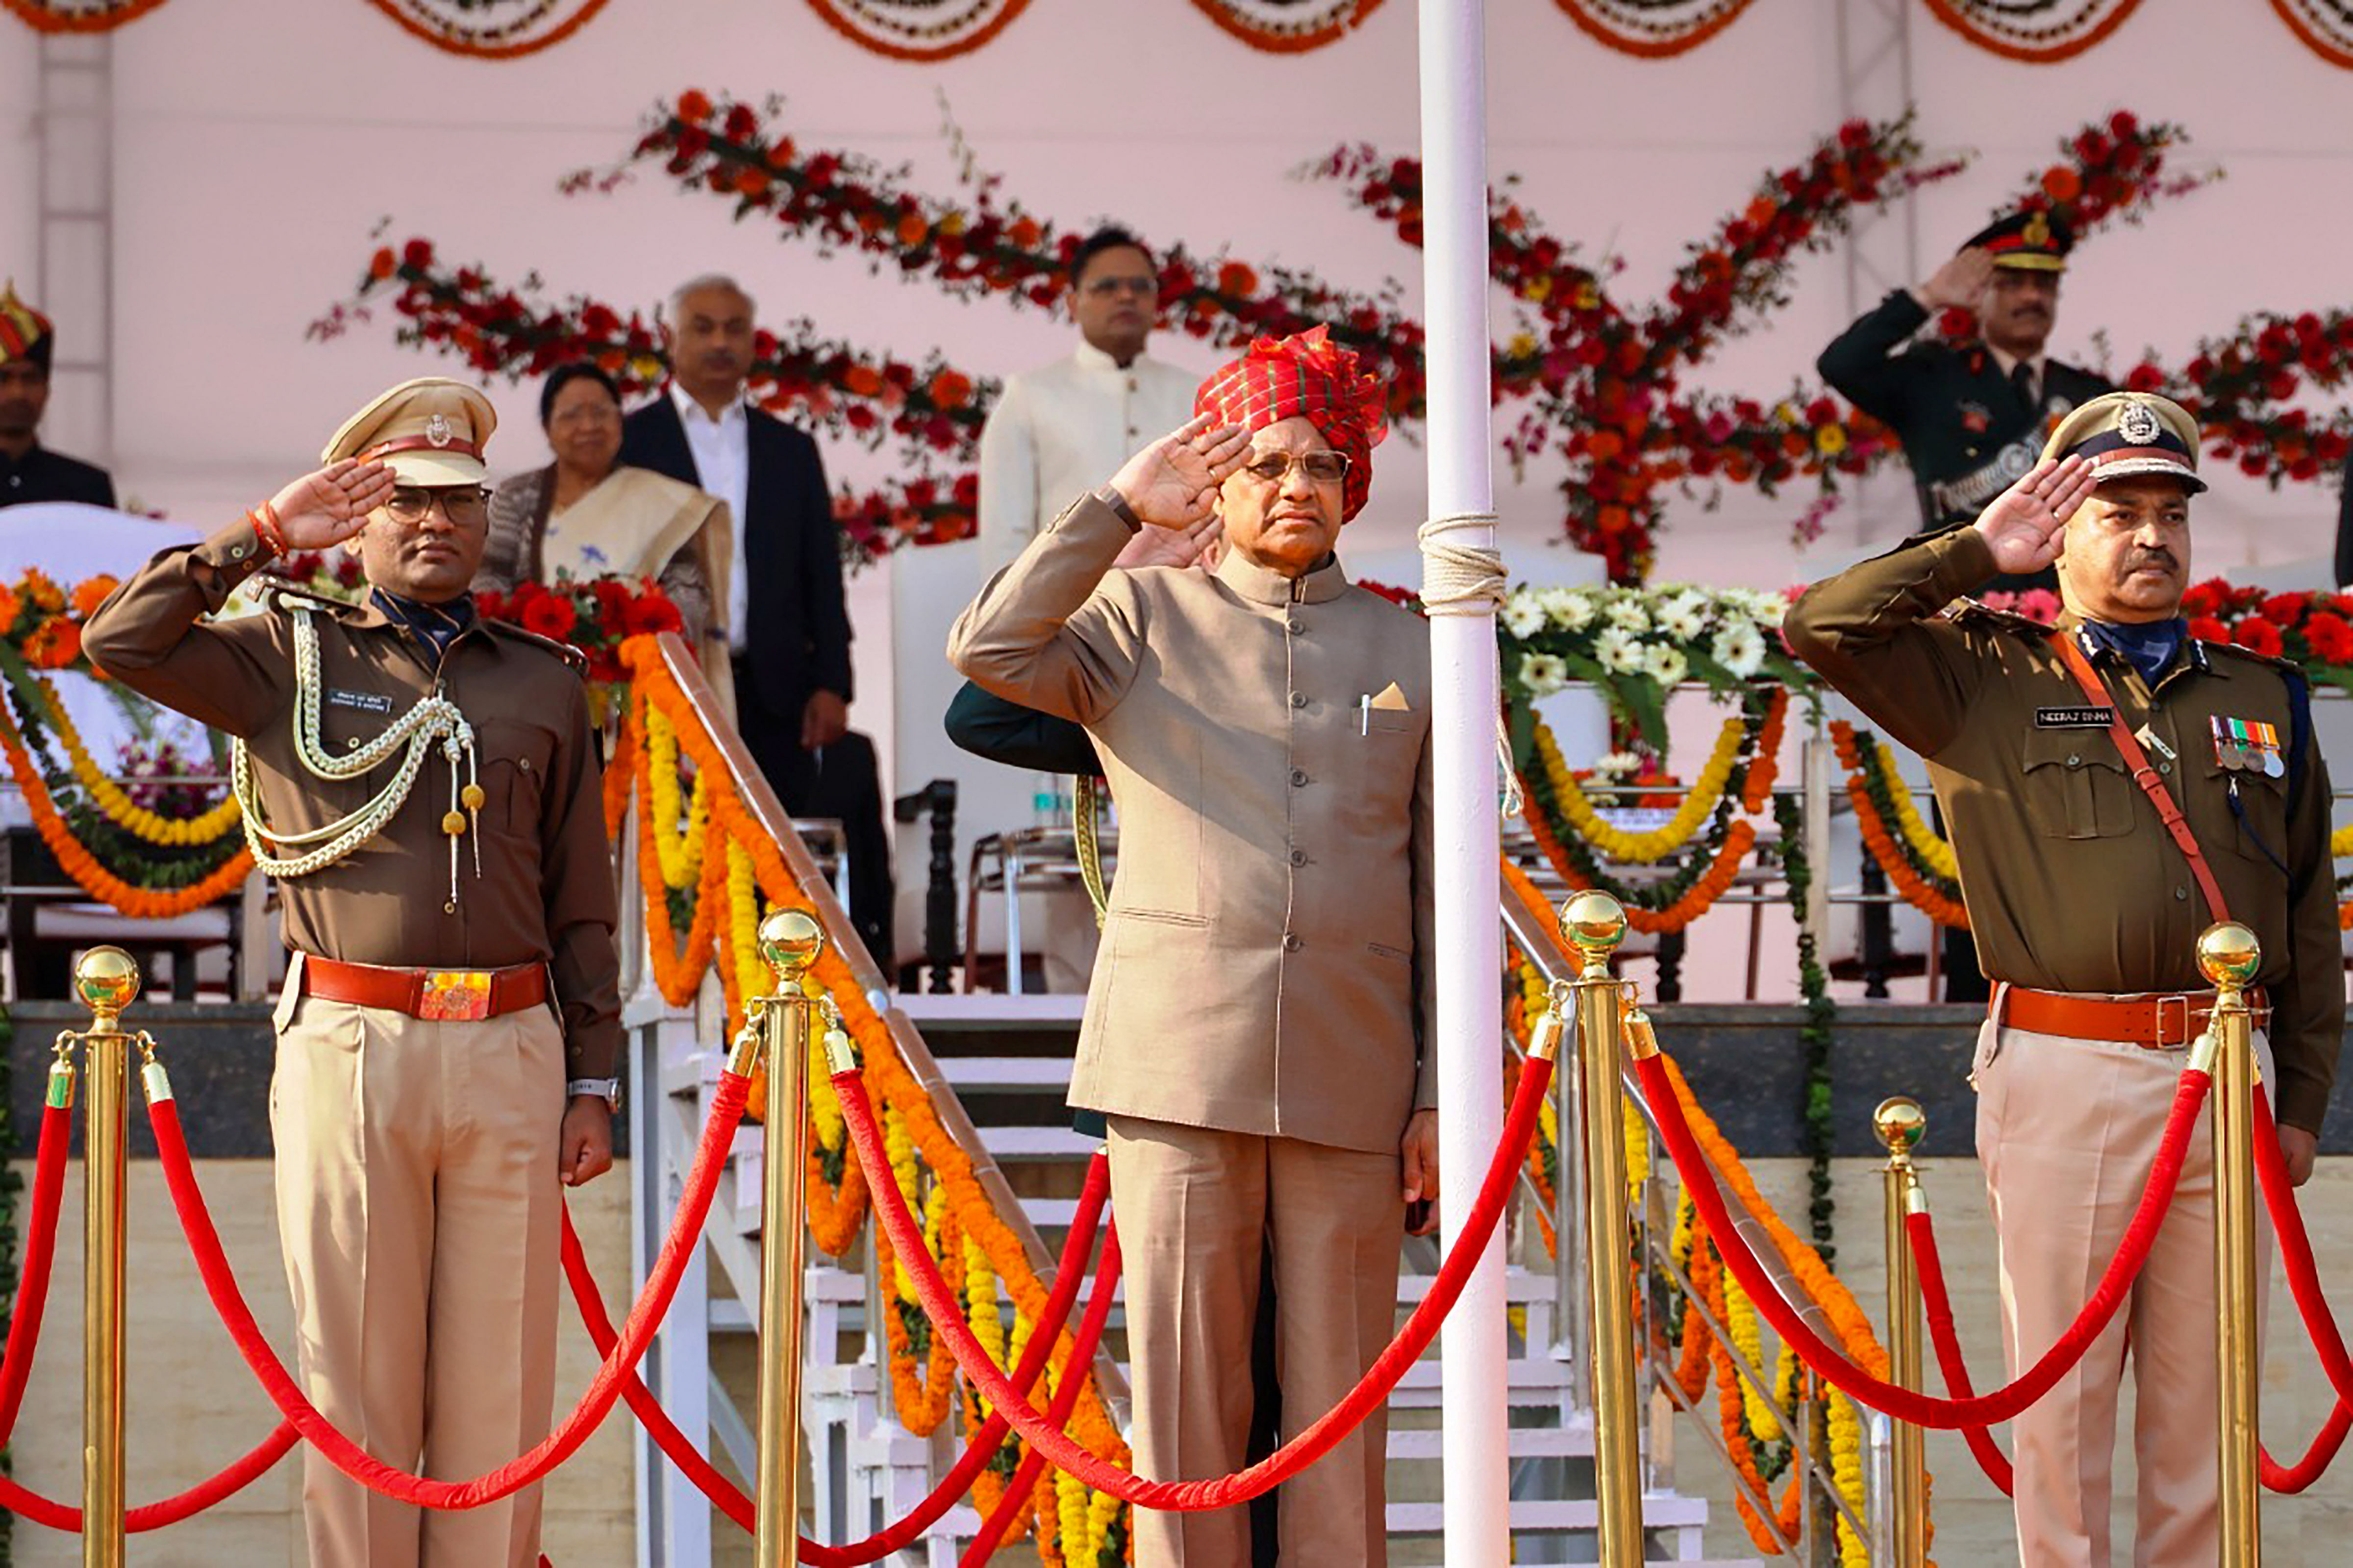 Ramesh Bais takes the salute during the 74th Republic Day parade, in Ranchi. Credit: PTI File Photo